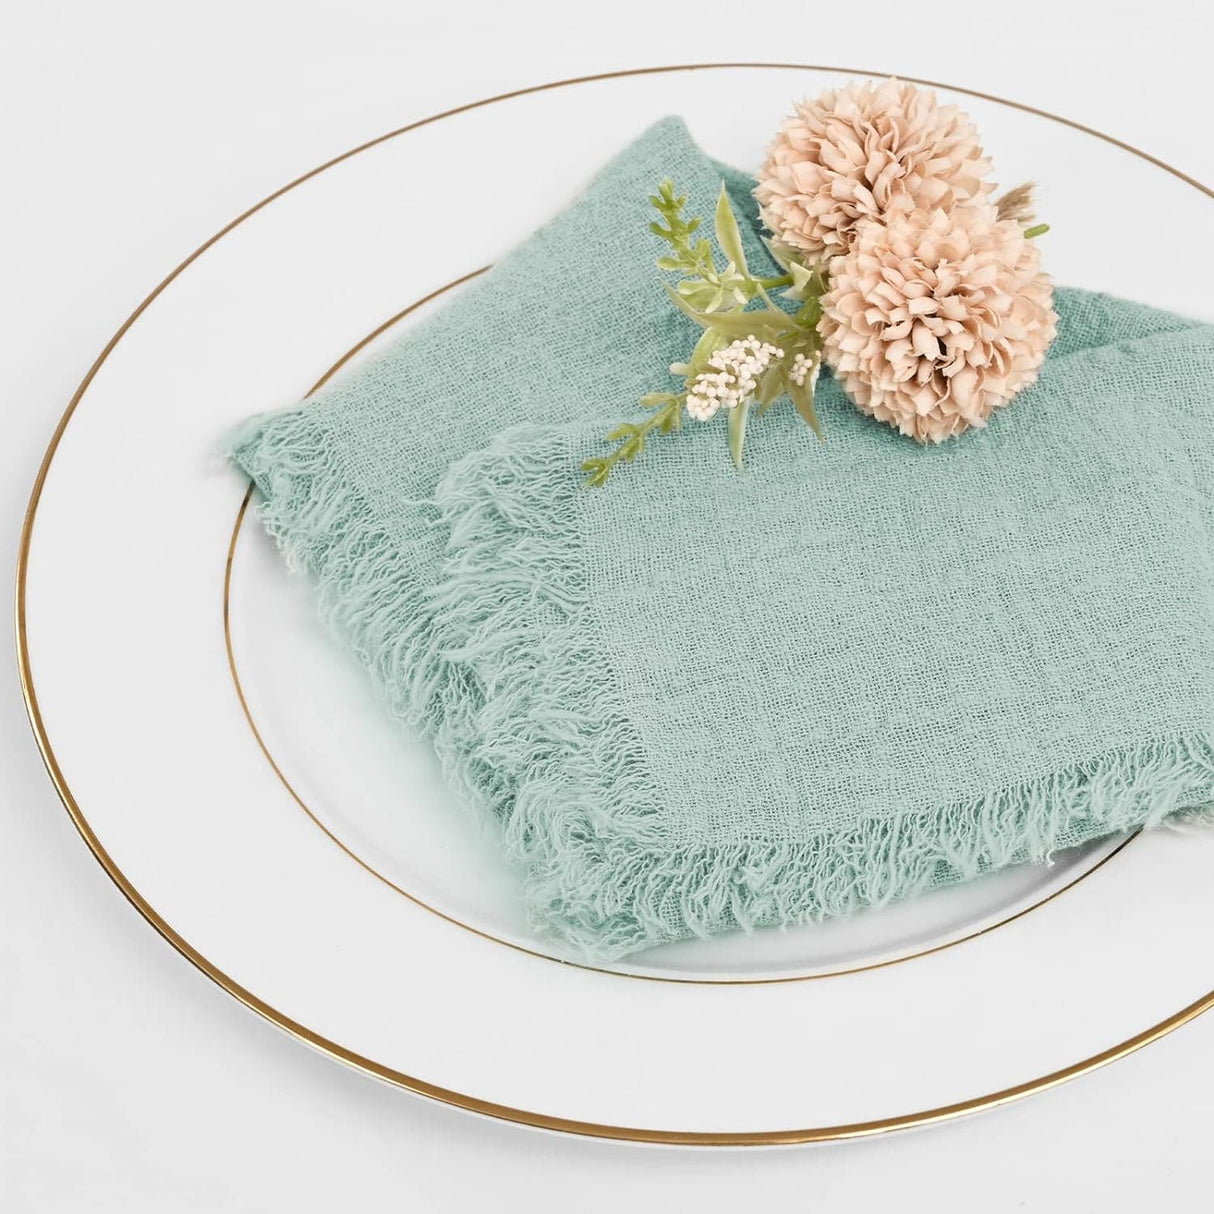 Handmade Cloth Napkins with Fringe 16x16 Inches,Set of 24 Cotton Napkins,Delicate Handmade Cloth Napkins Rustic Dinner Napkins Decorative Table Napkins for Wedding/Dinner/Party